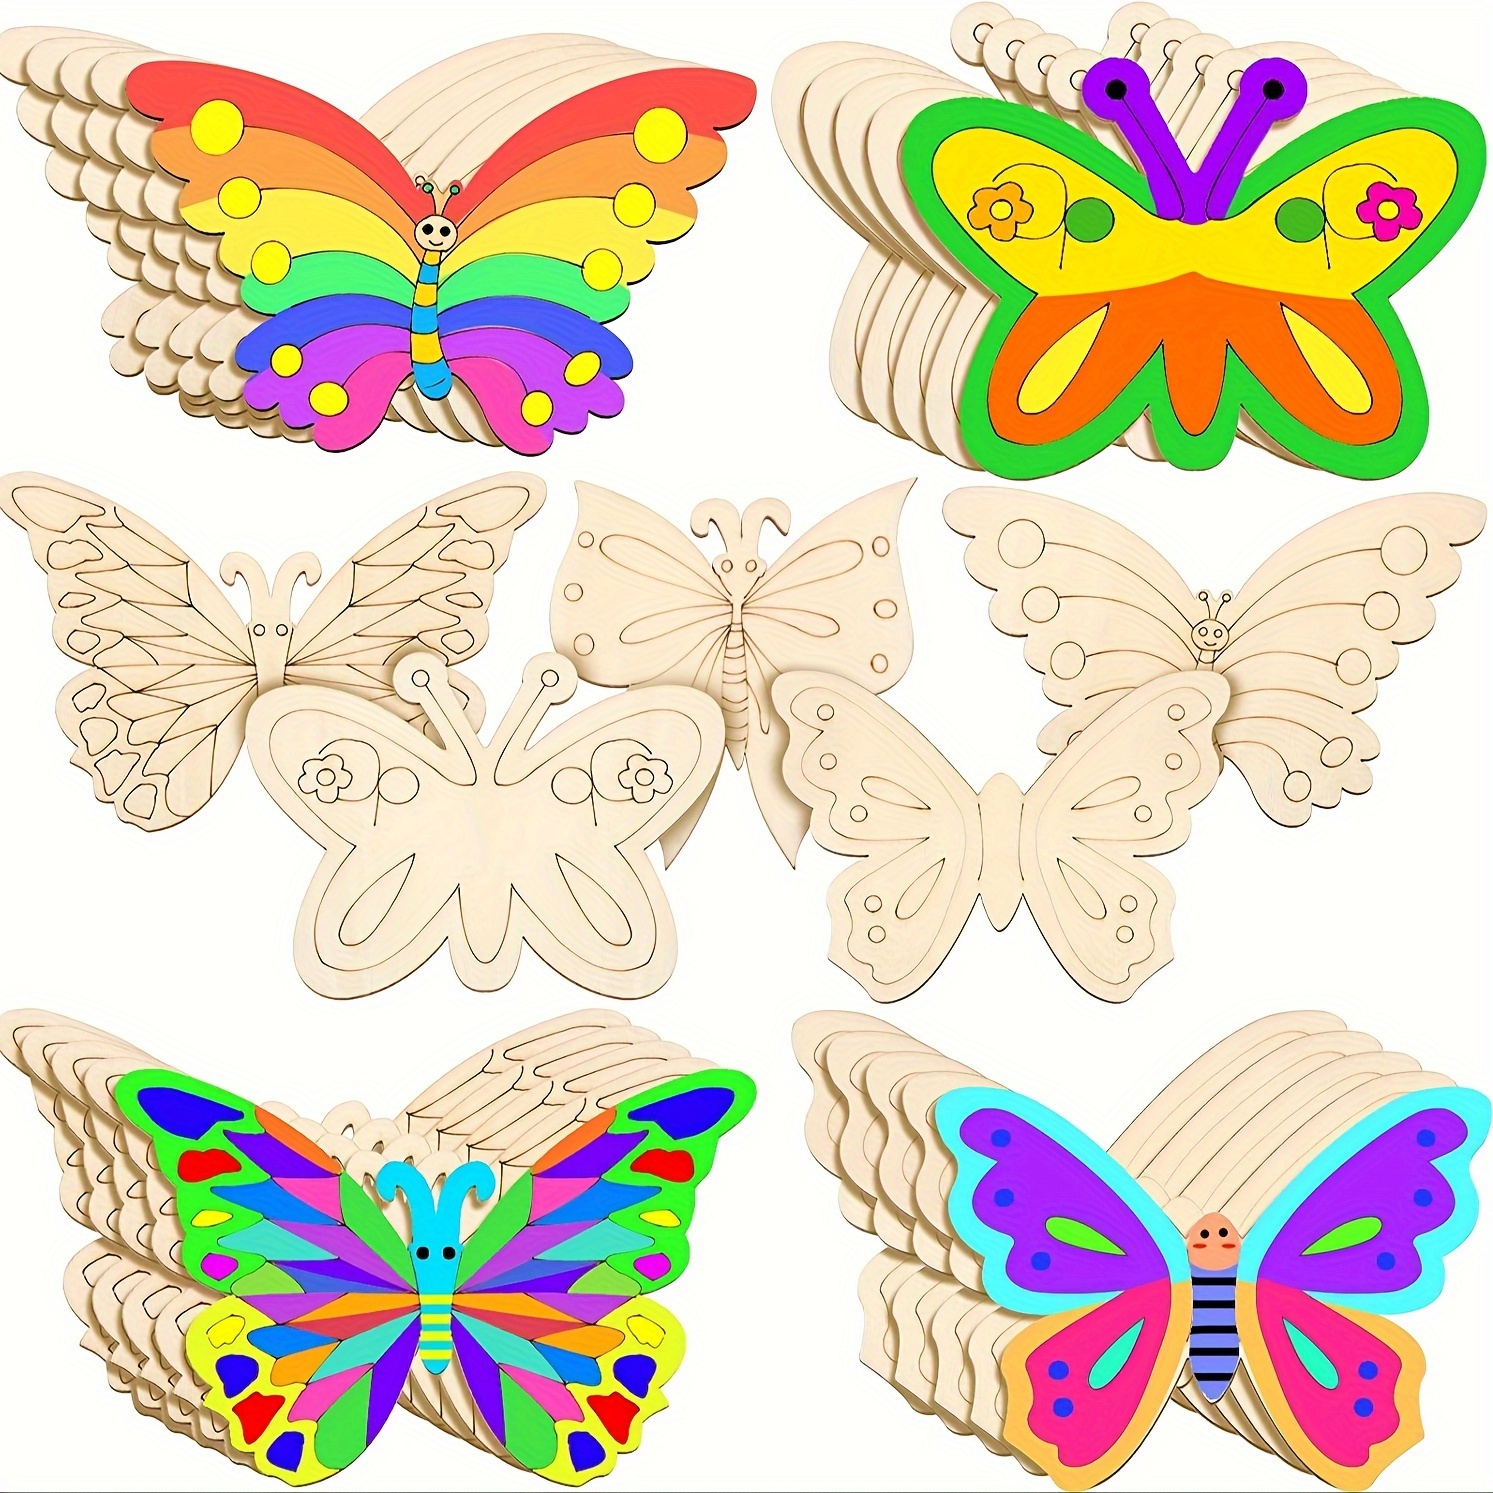 80pcs Unfinished Wooden Cutouts,8 Styles Wood Butterfly Flower Bee Slices,Blank Wooden Paint Crafts Unfinished Wood Cutouts,DIY Wooden Paint Crafts Fo